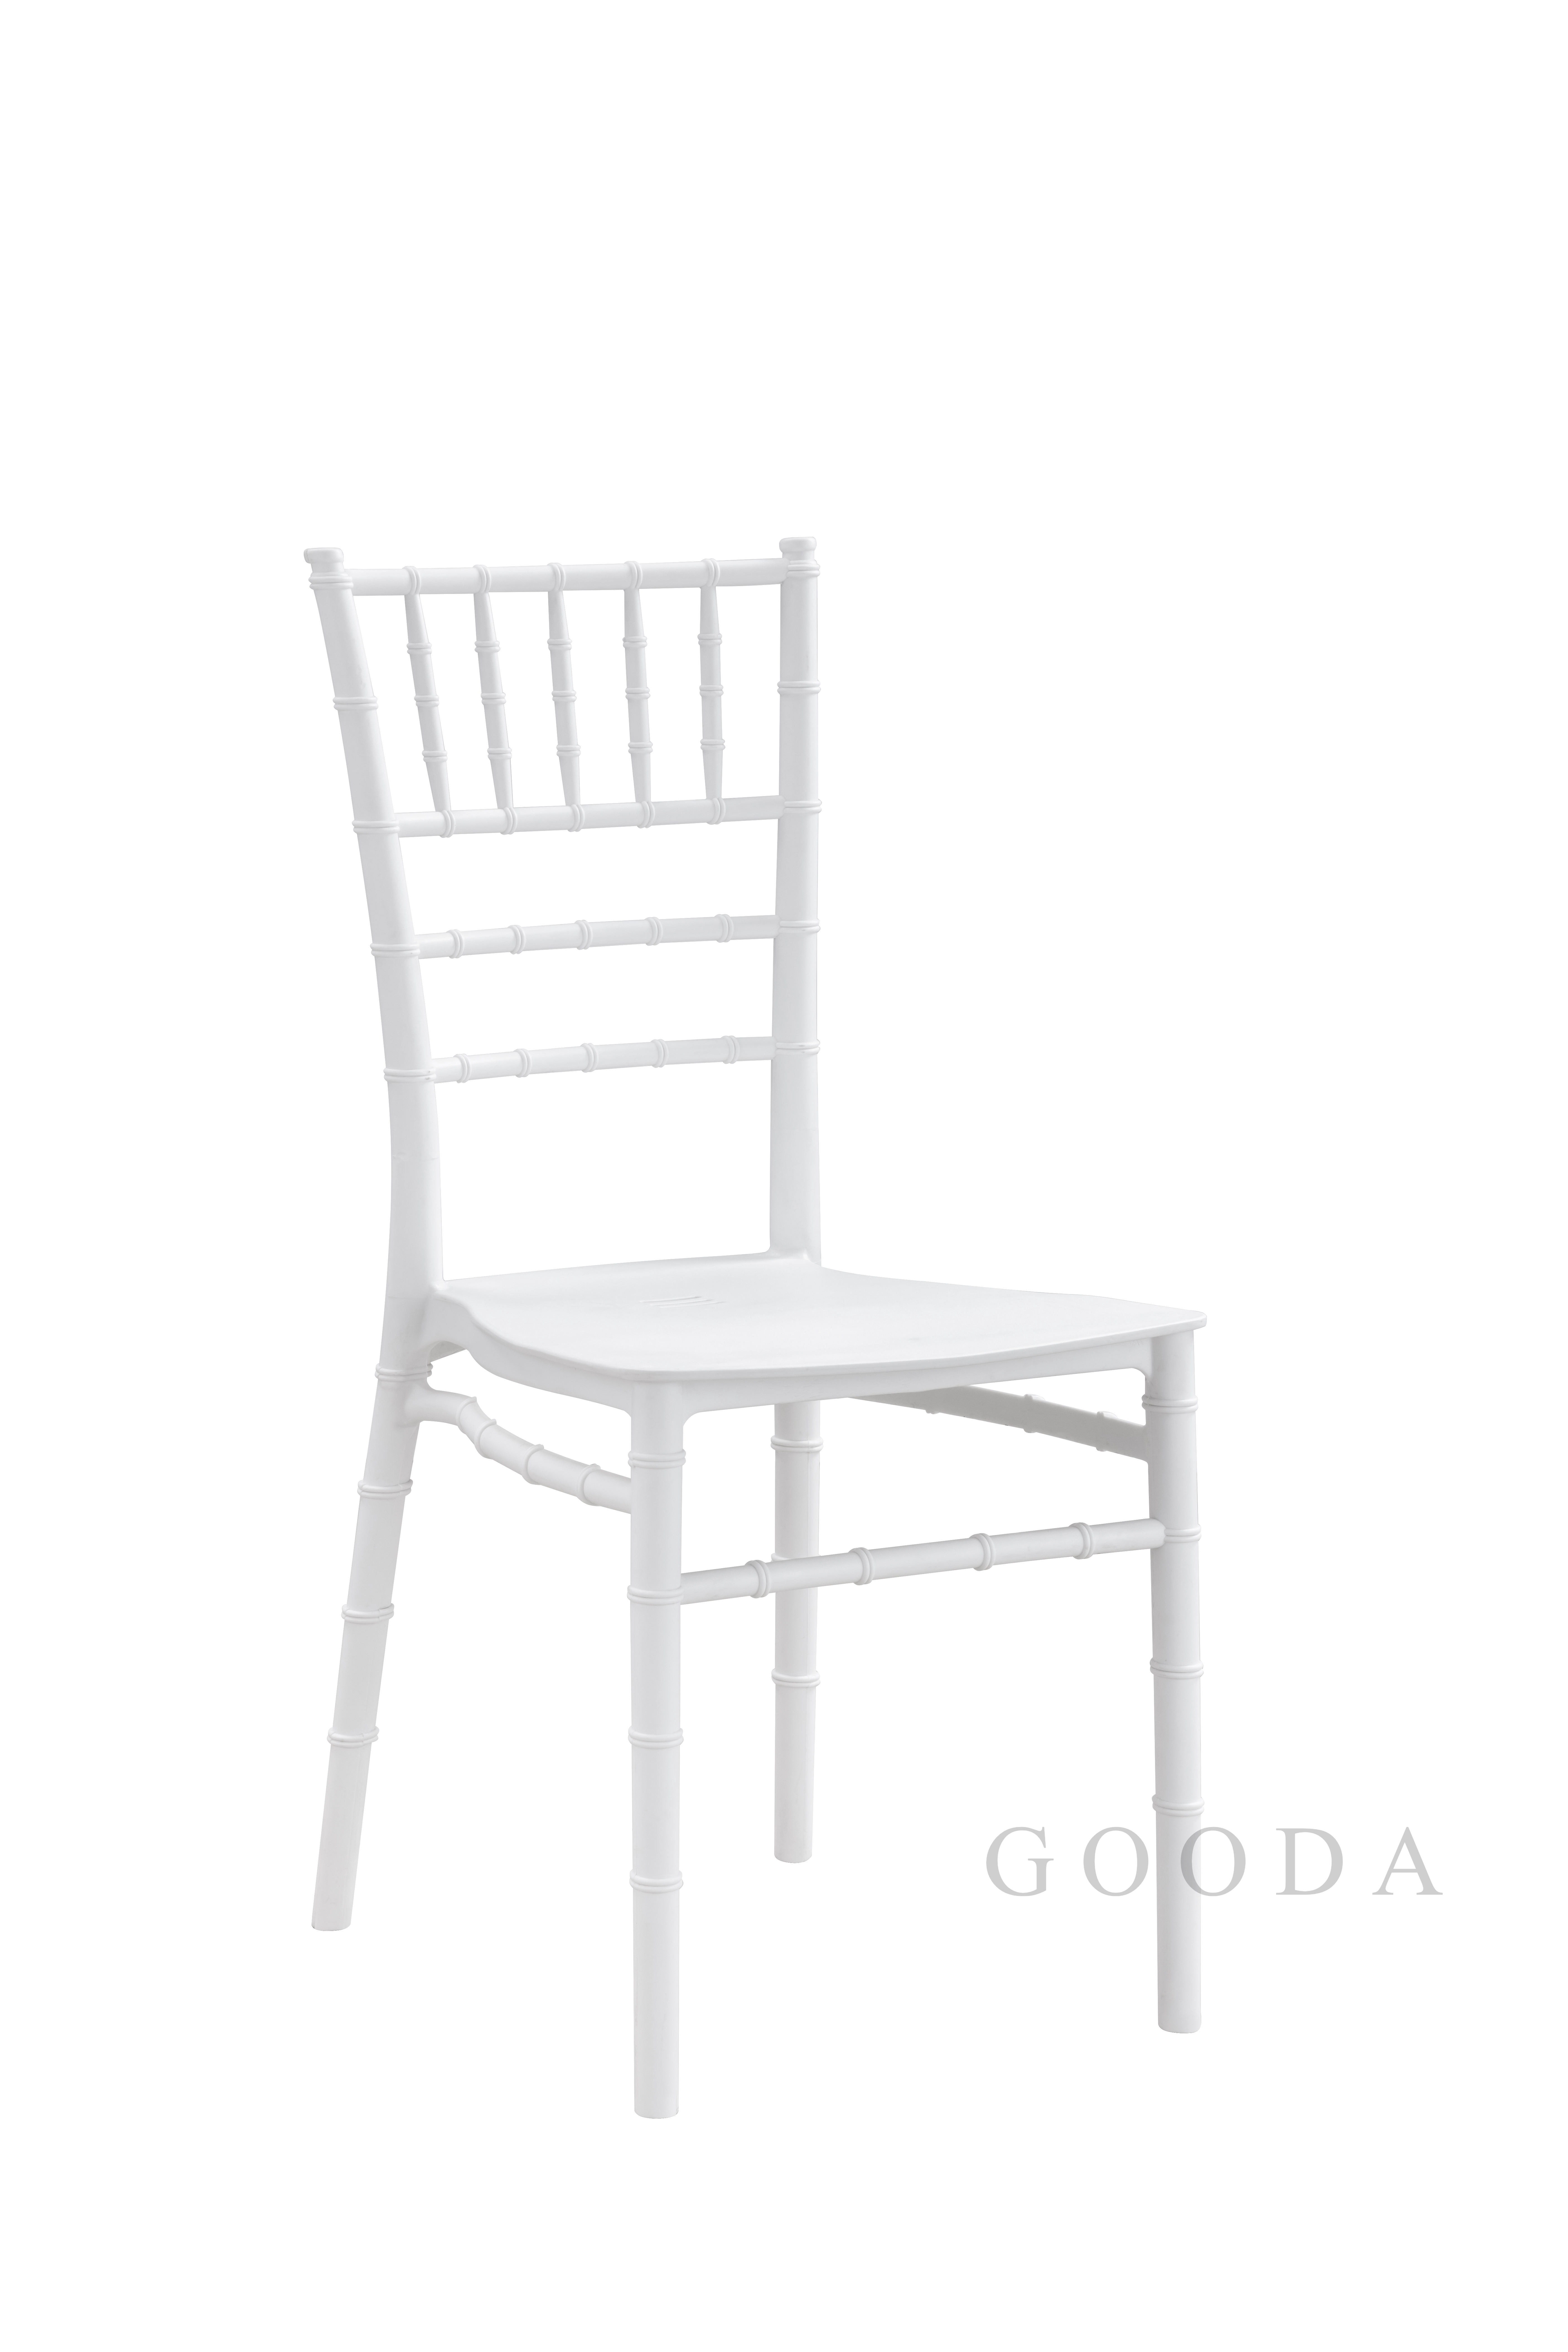 Dining Chair,plastic chair,P-203